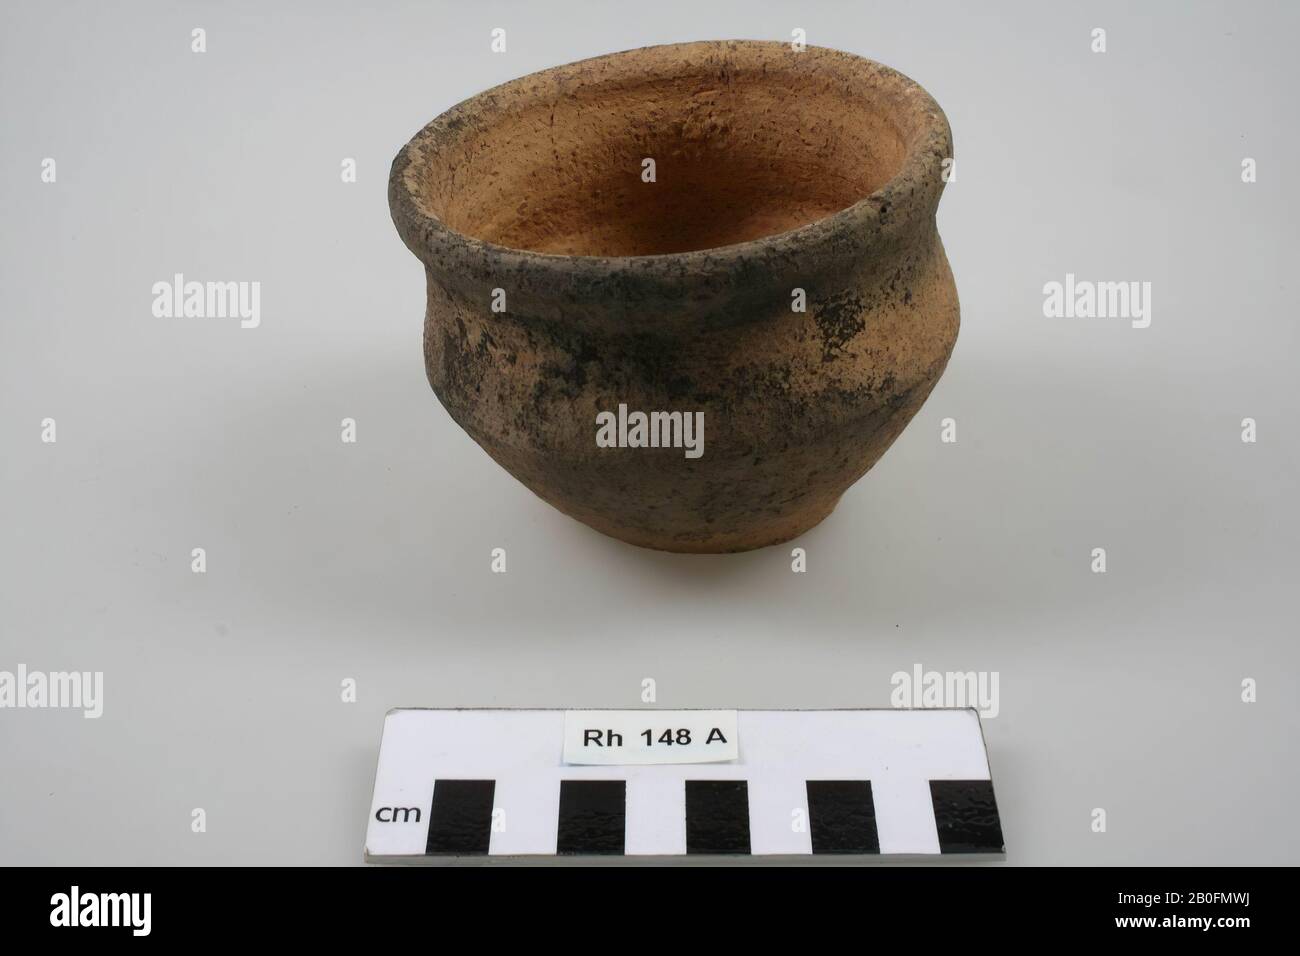 Knikpotn of rough-walled earthenware with convex Stock Photo